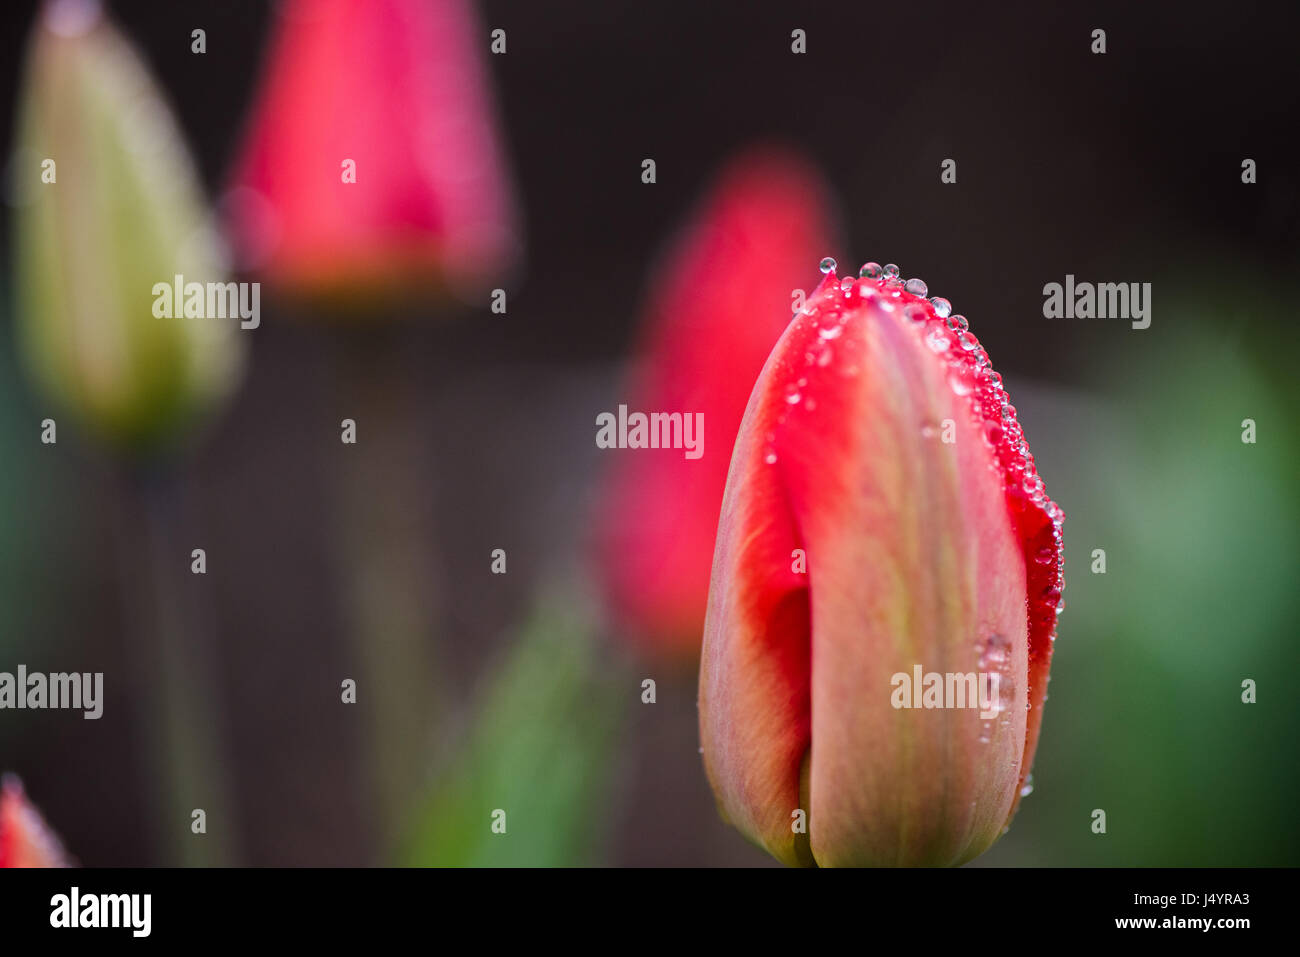 A pink tulips flowers with water drops on the edge Stock Photo